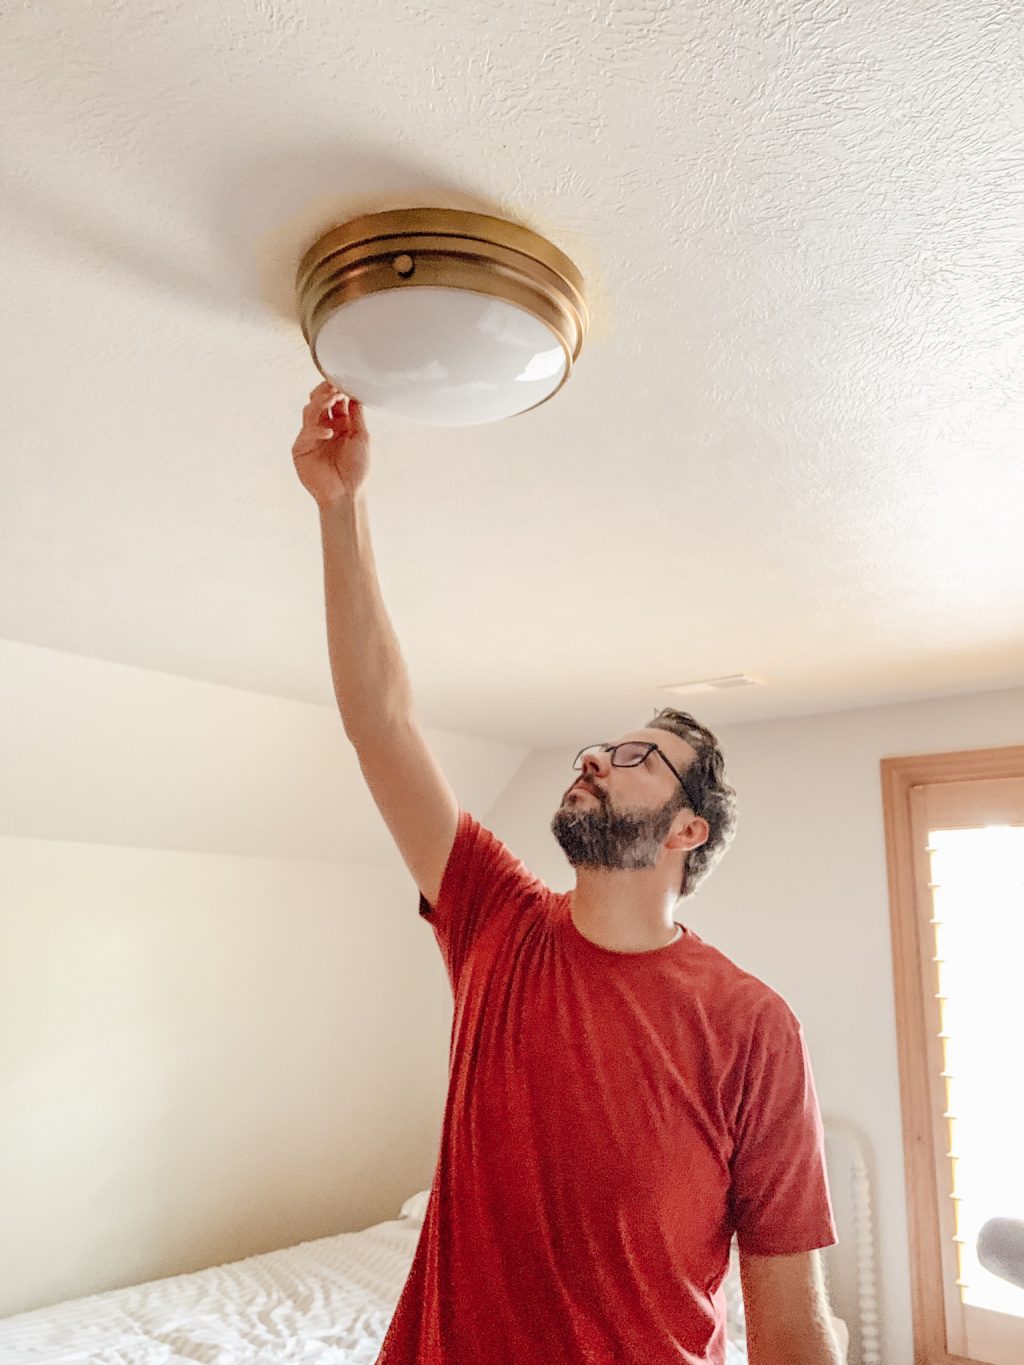 How to swap out a light fixture